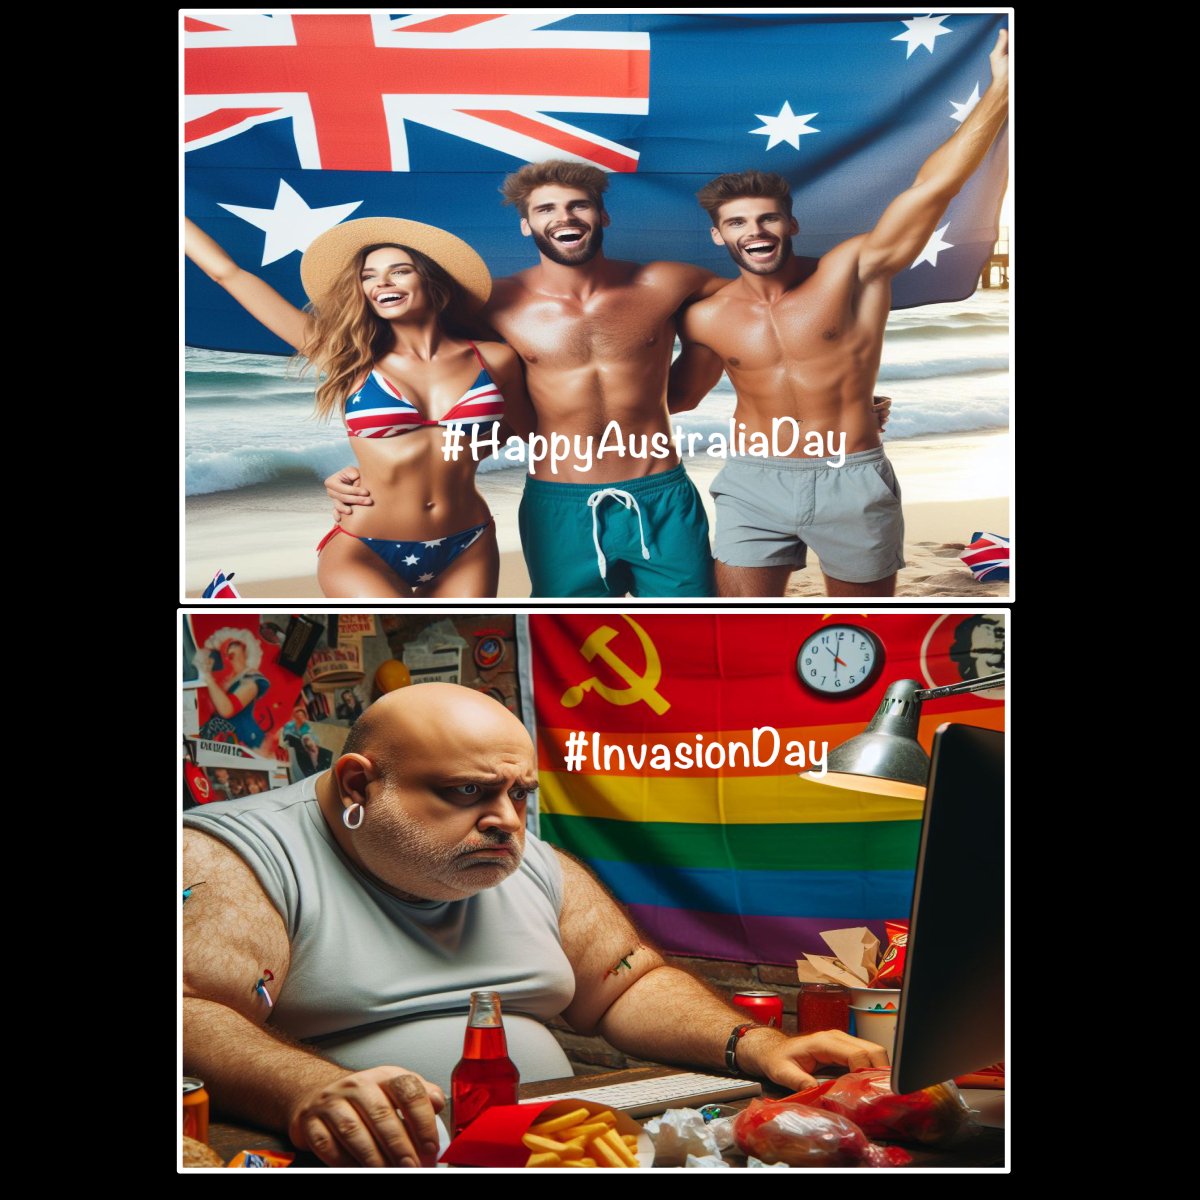 Which is your hastag ?

#HappyAustraliaDay 
#InvasionDay